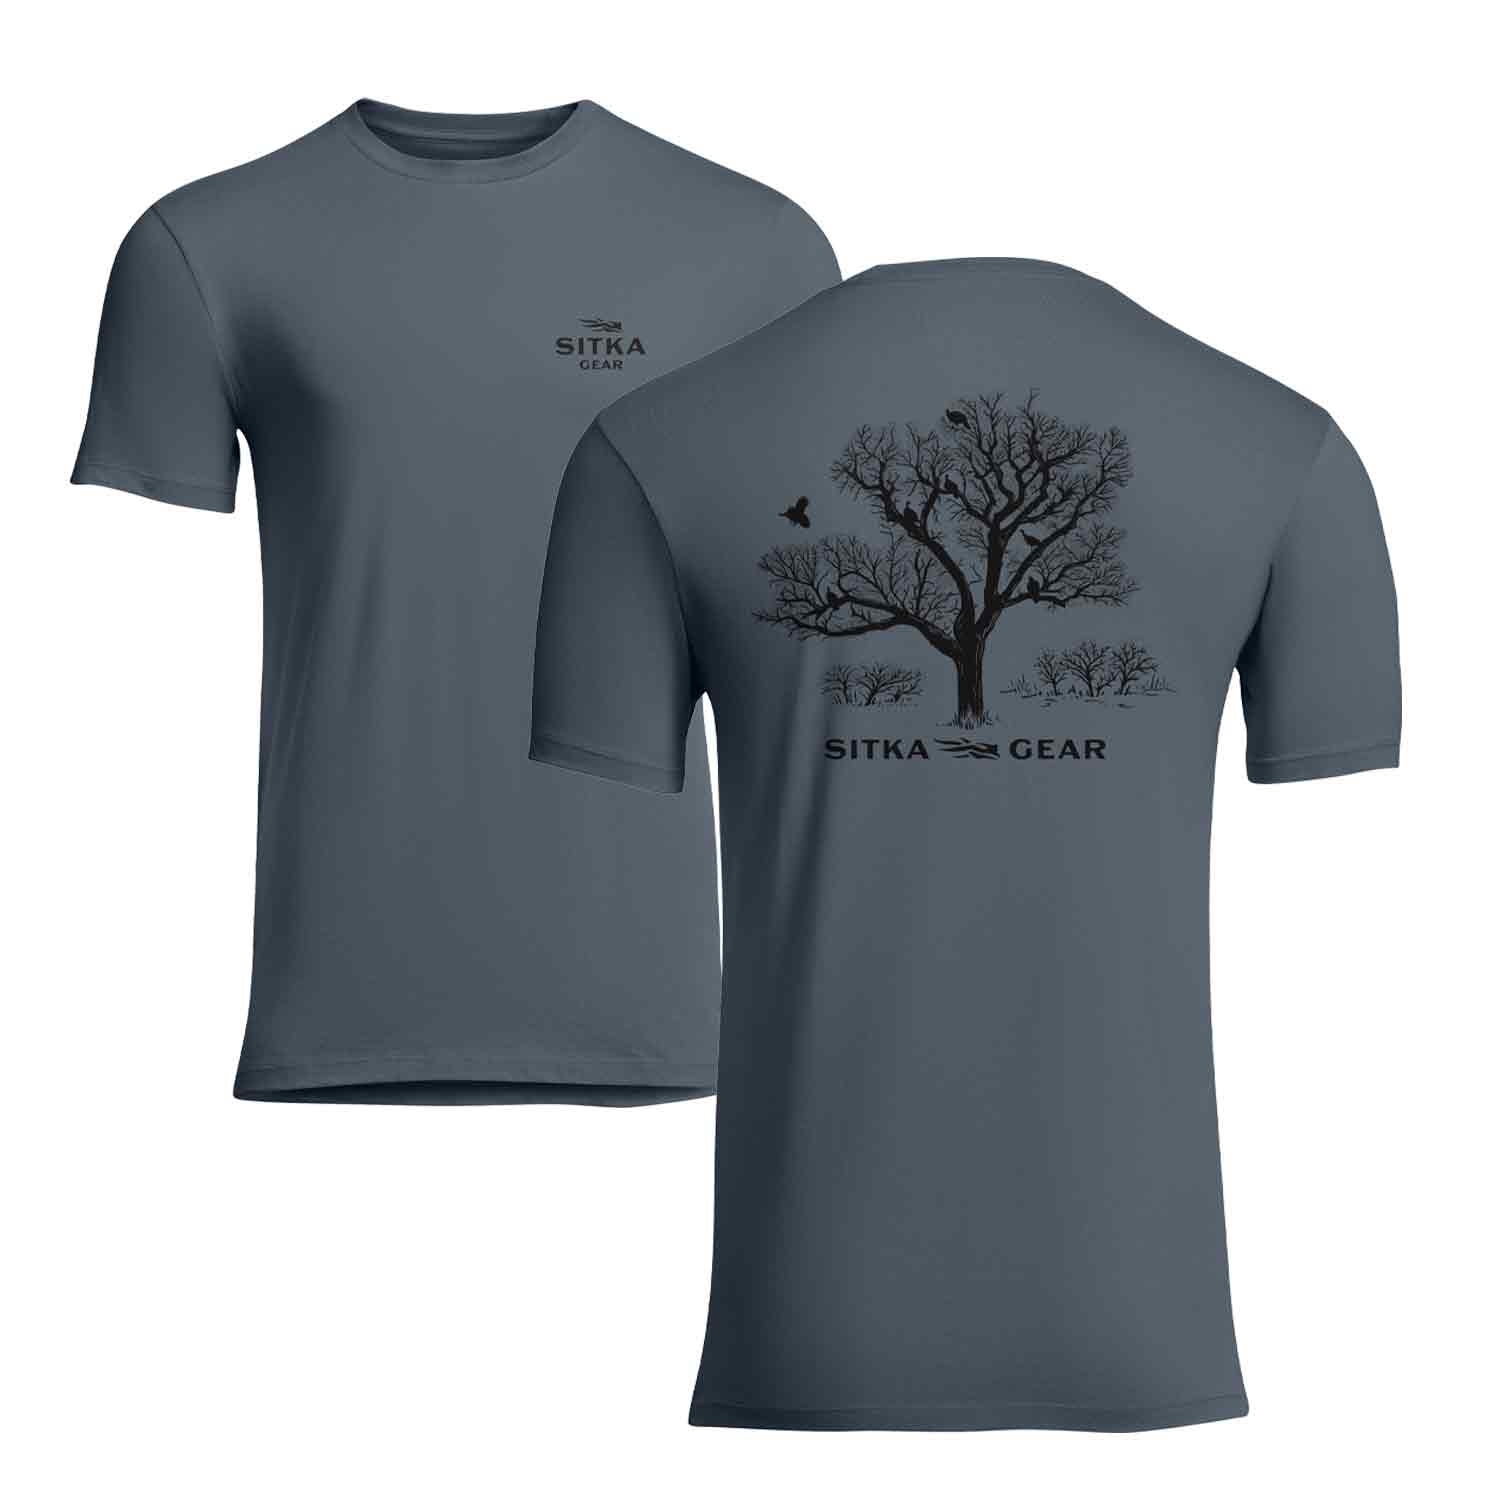 Sitka Roost Tee